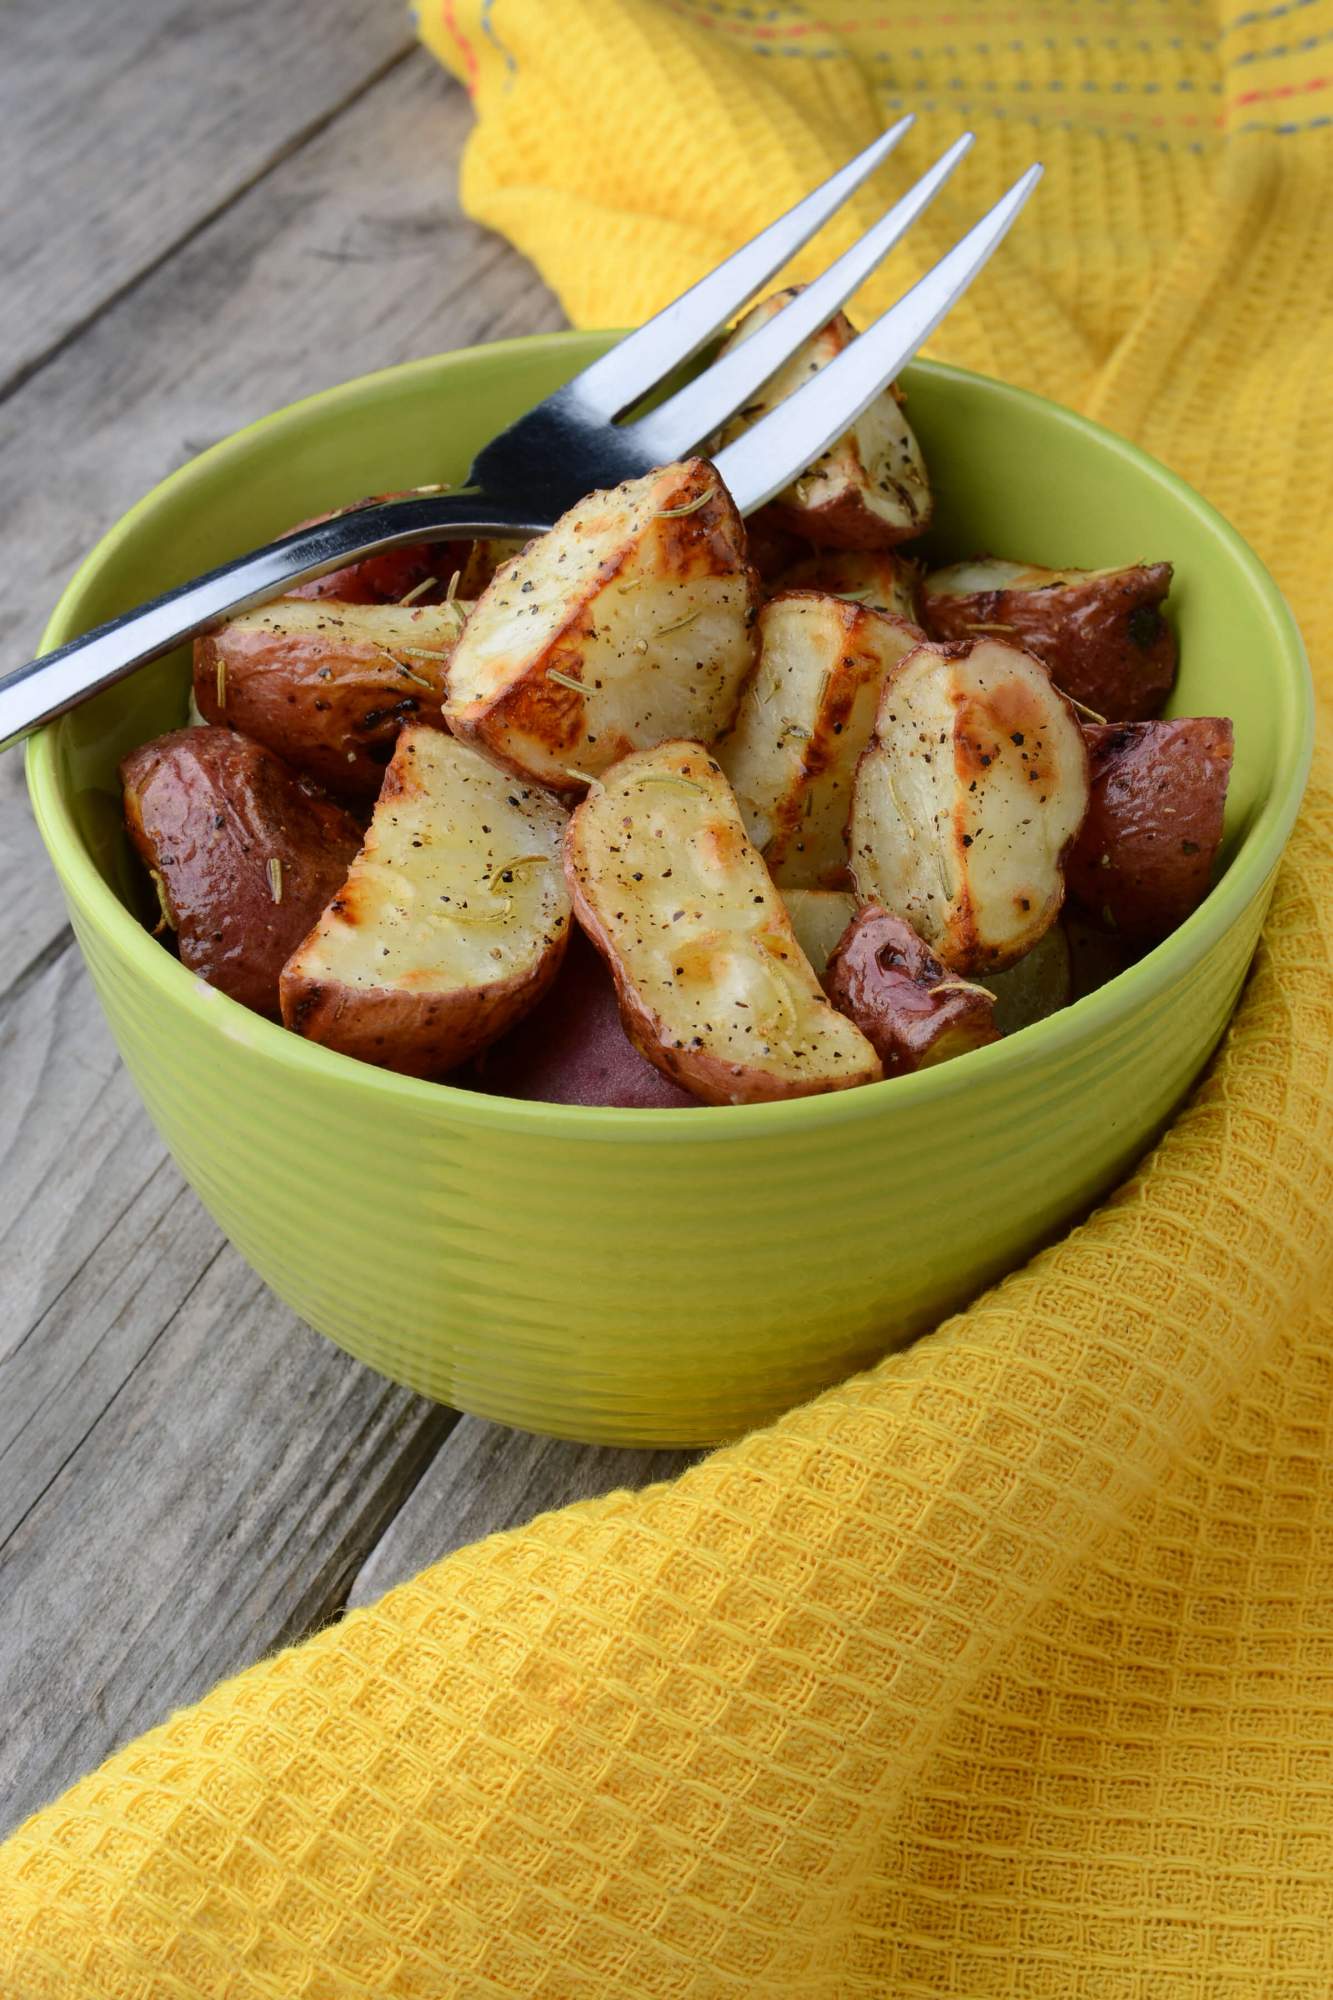 Grilled red potatoes in a bowl with a yellow napkin.